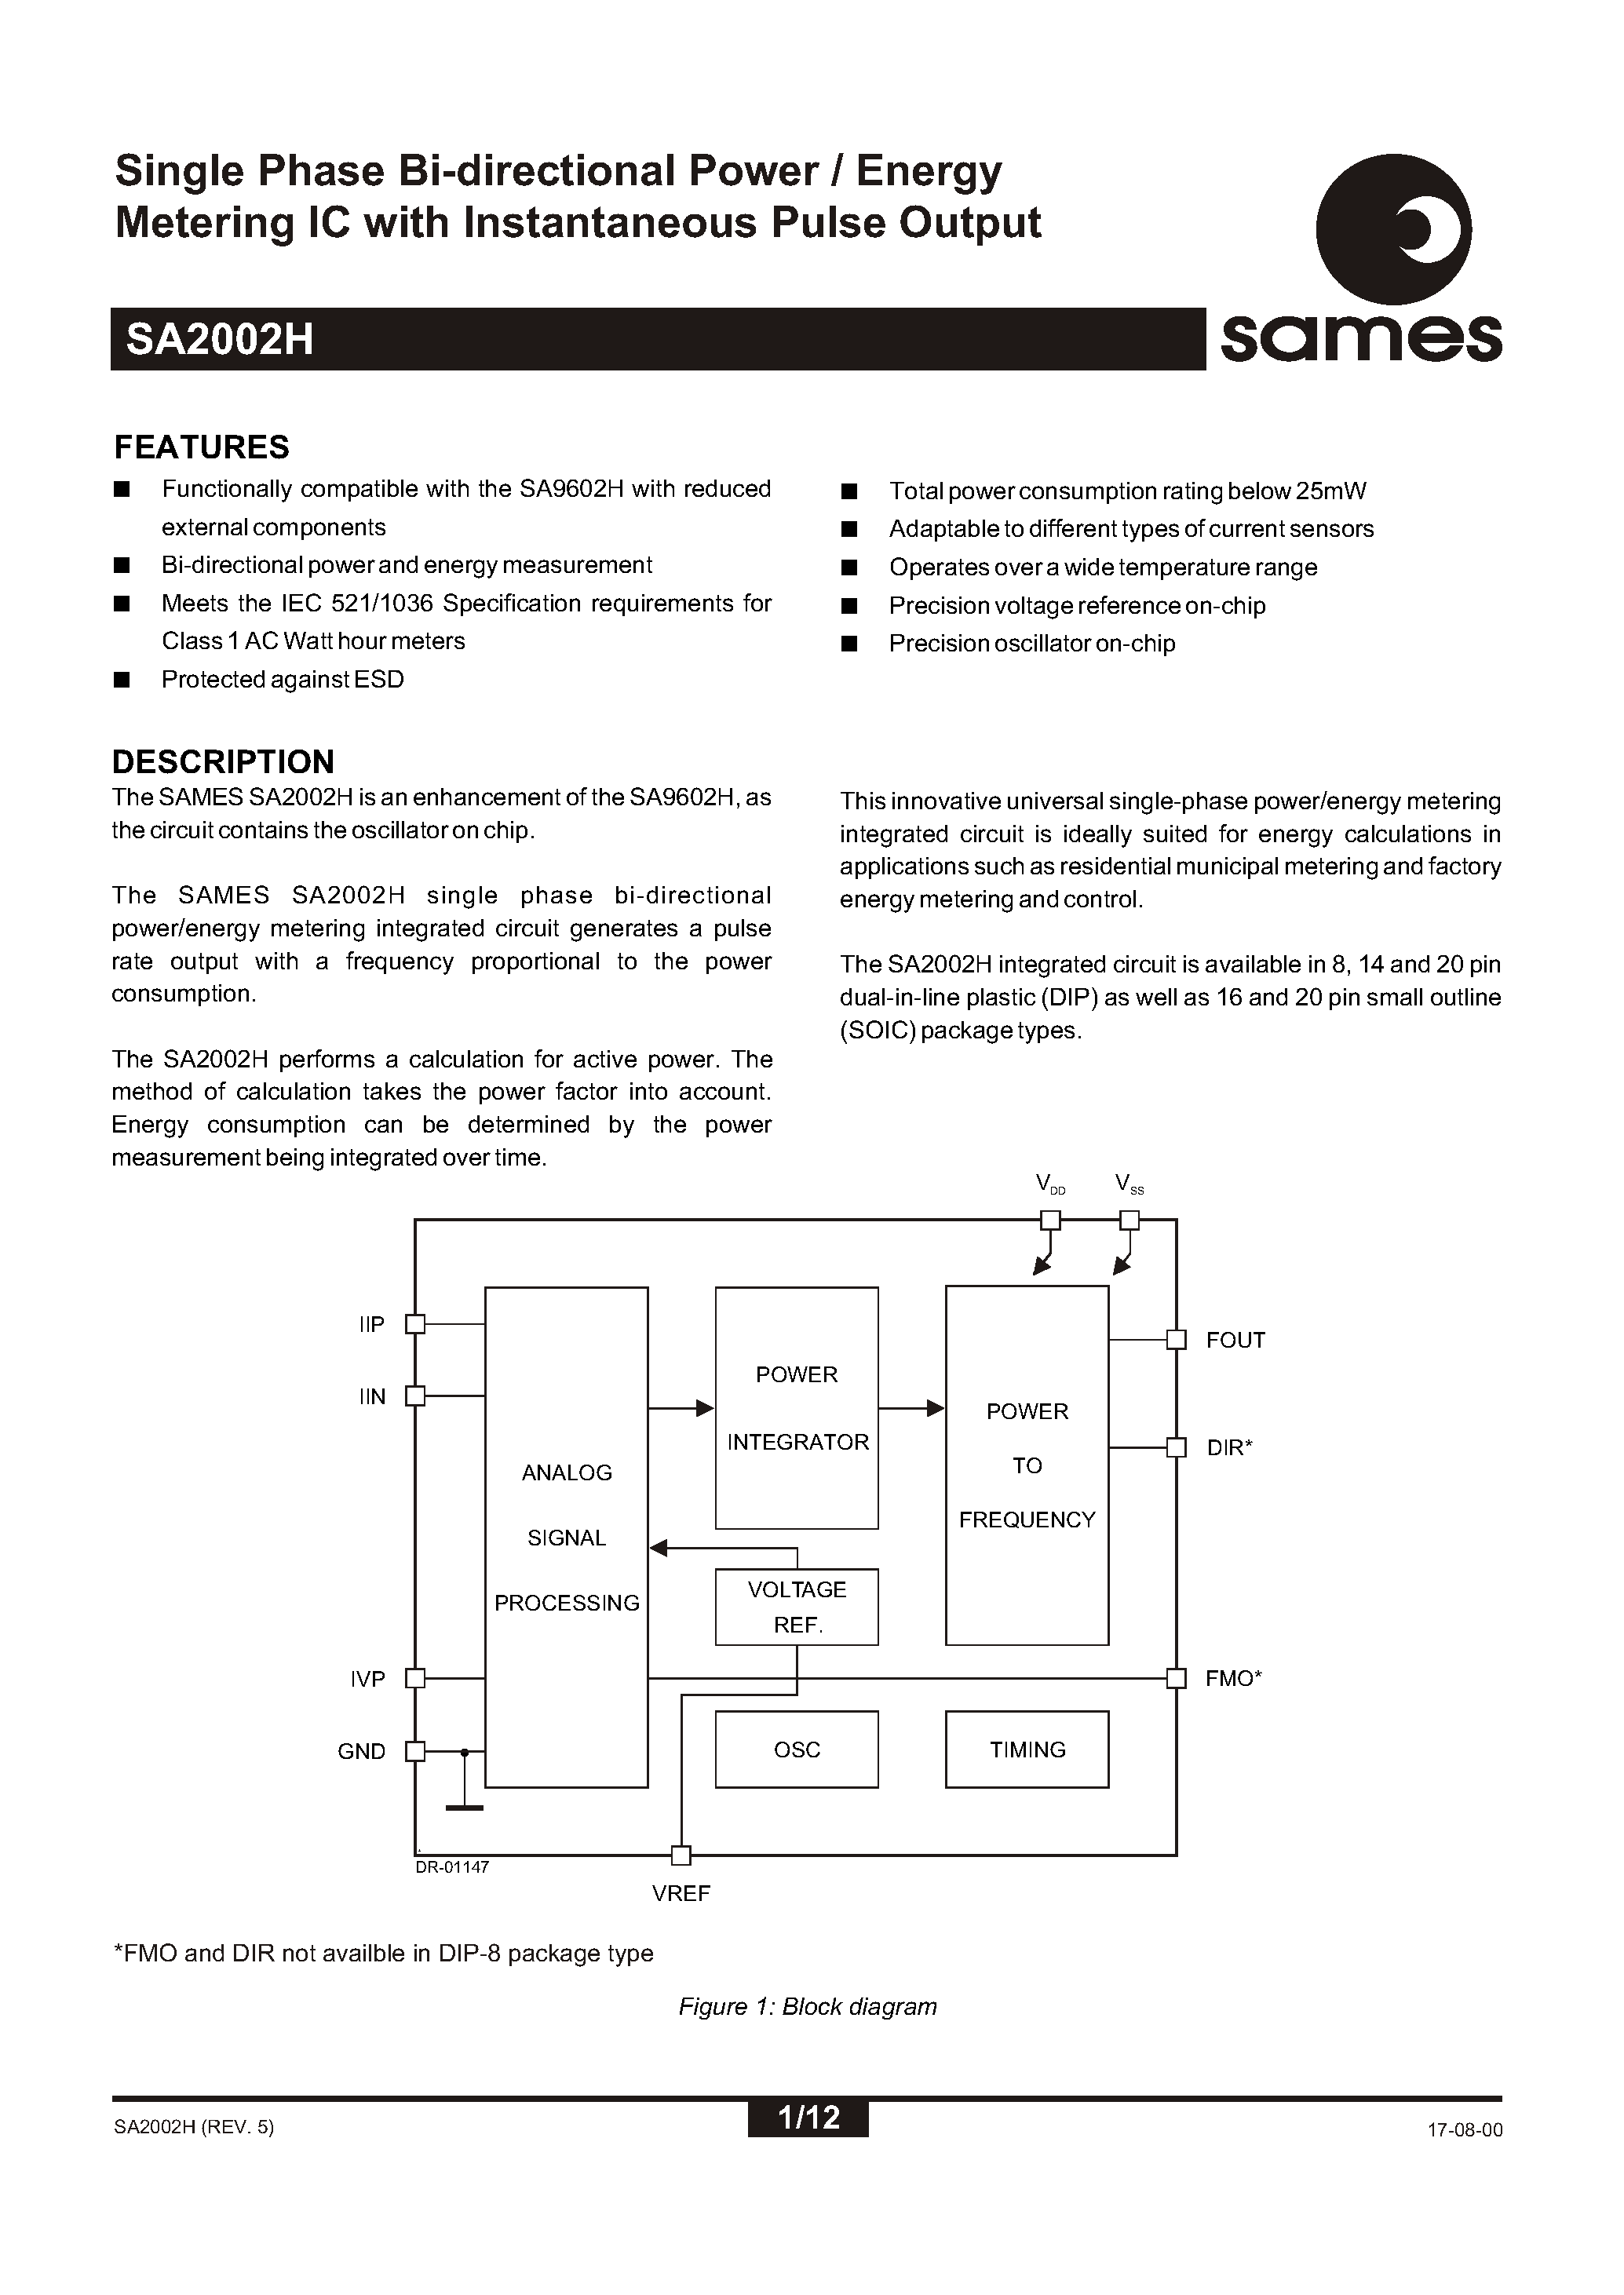 Даташит SA2002H - Single Phase Bi-directional Power / Energy Metering IC with Instantaneous Pulse Output страница 1